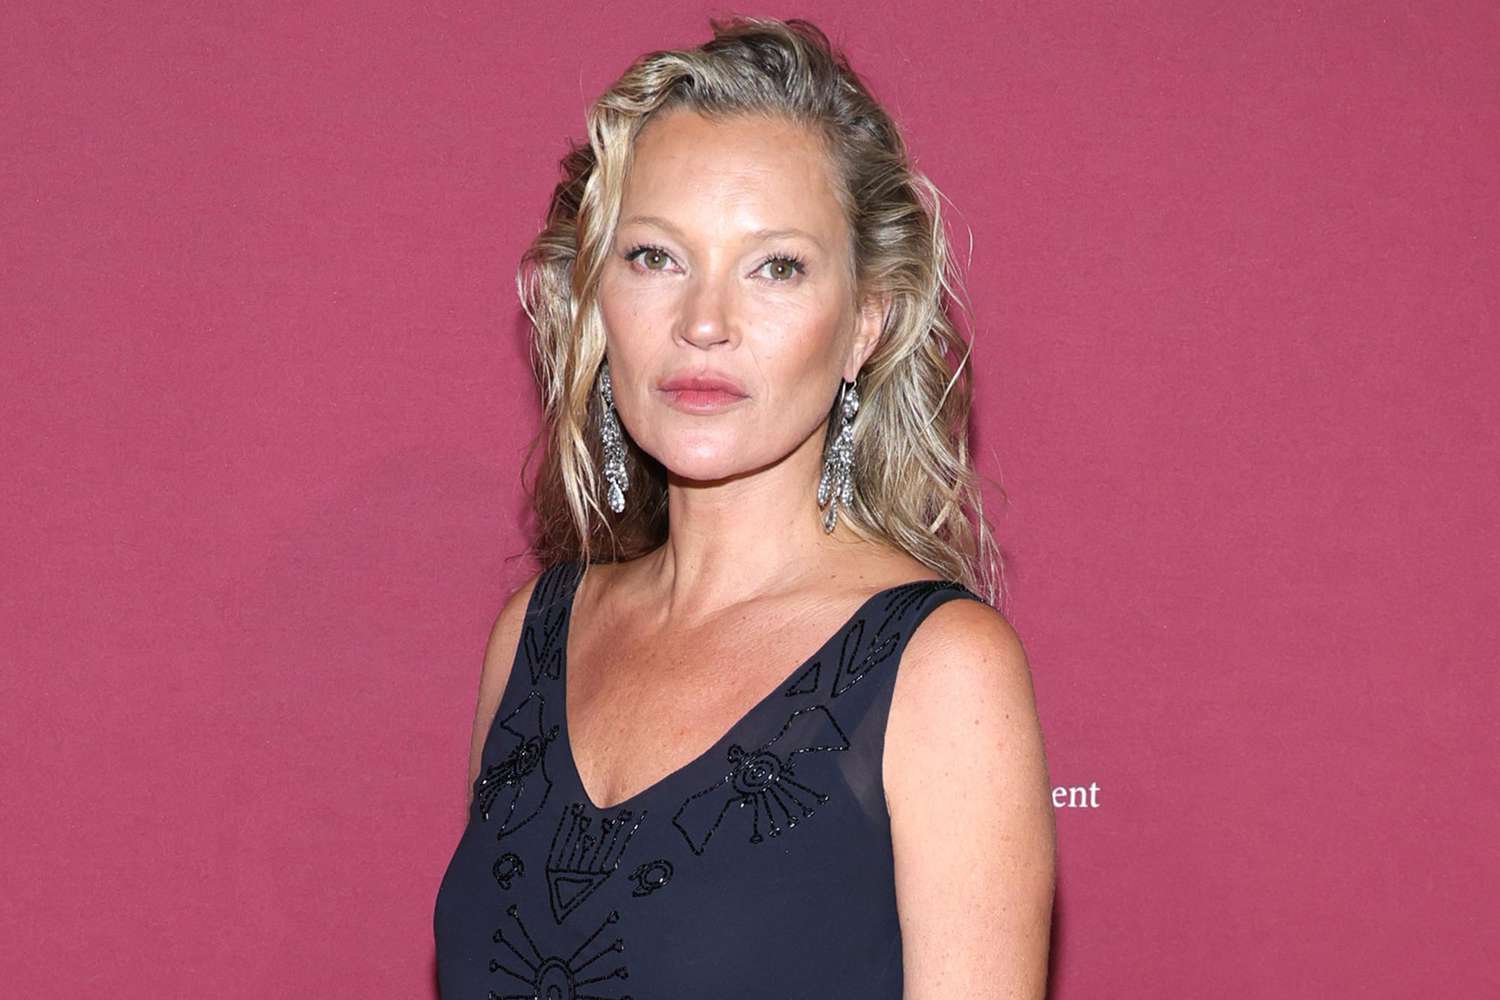 Kate Moss attends the 2022 Prince's Trust Gala at Cipriani 25 Broadway on April 28, 2022 in New York City.